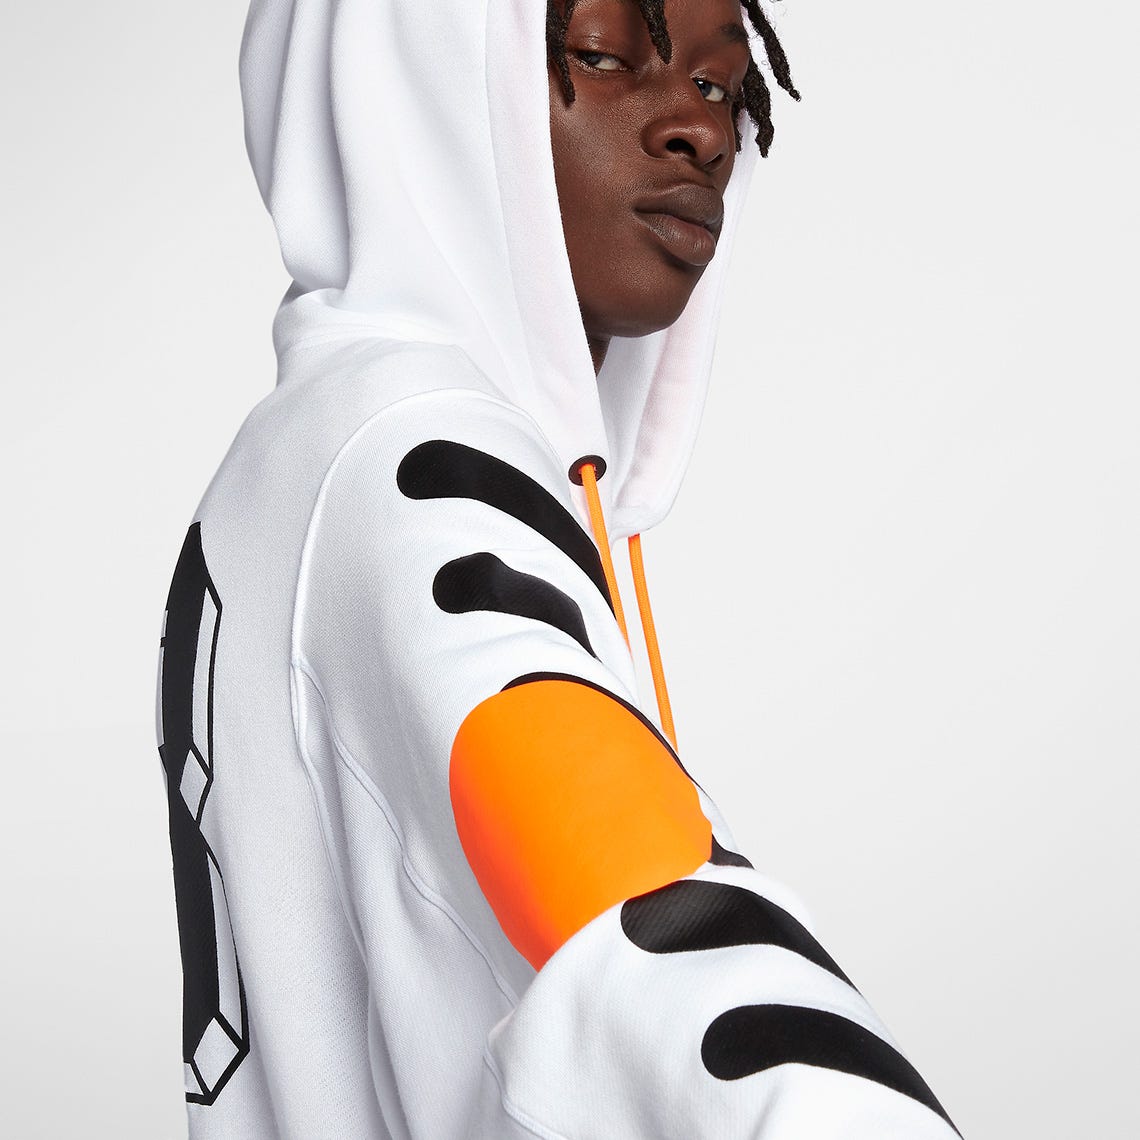 Off-White, Limited Edition